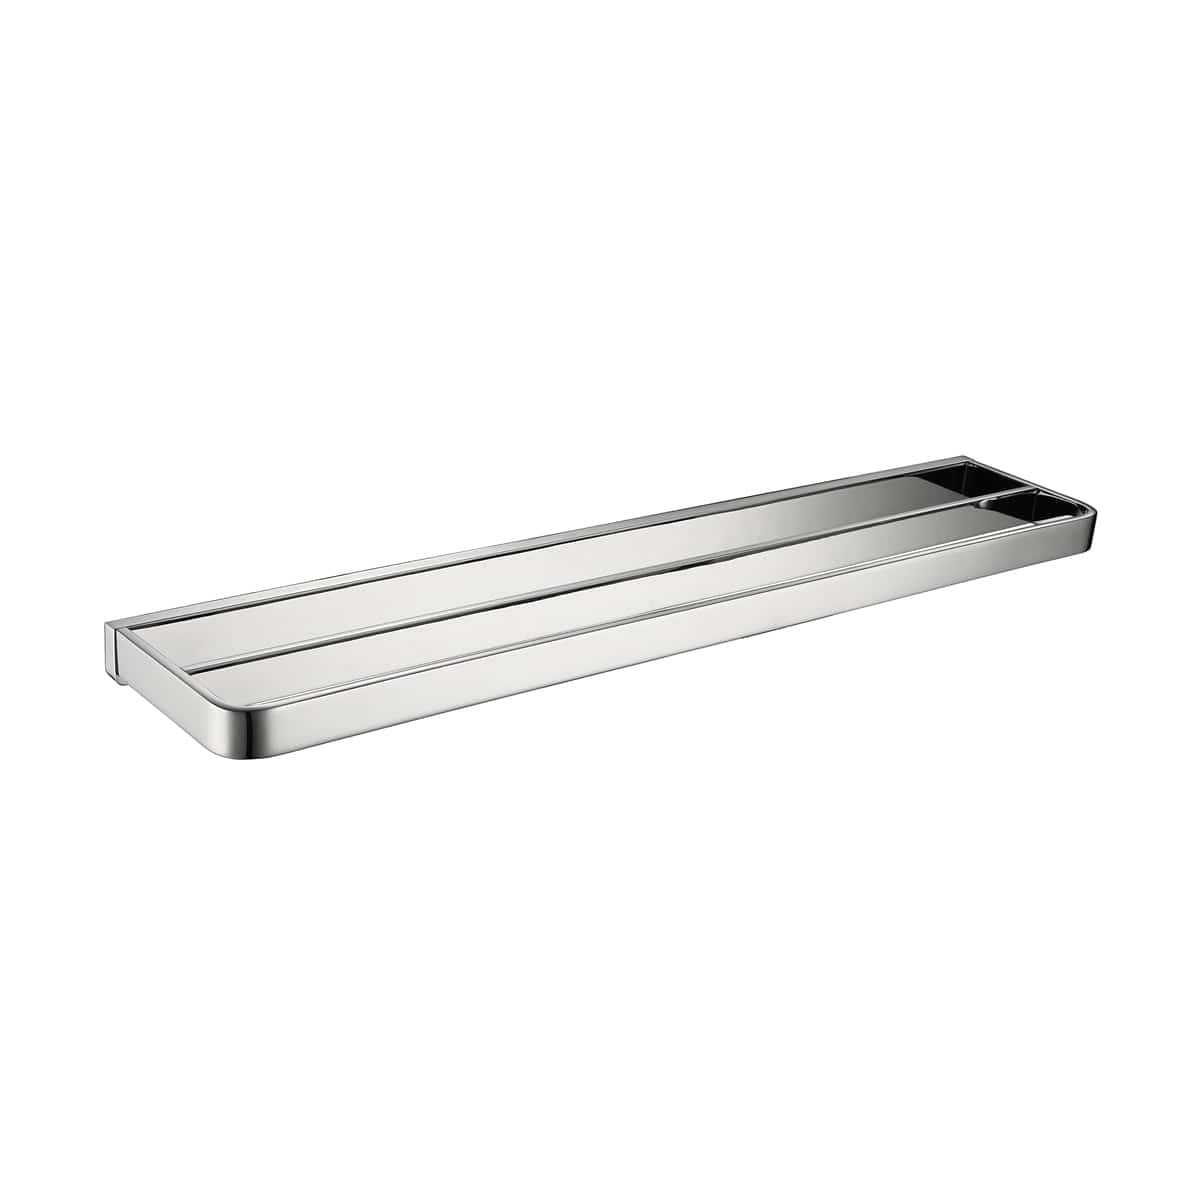 Shop Bathroom Brass Chrome Plated Double Rail Towel Bar Holder - GC5148 | Buy Online at Supply Master Accra, Ghana Bathroom Accessories Buy Tools hardware Building materials